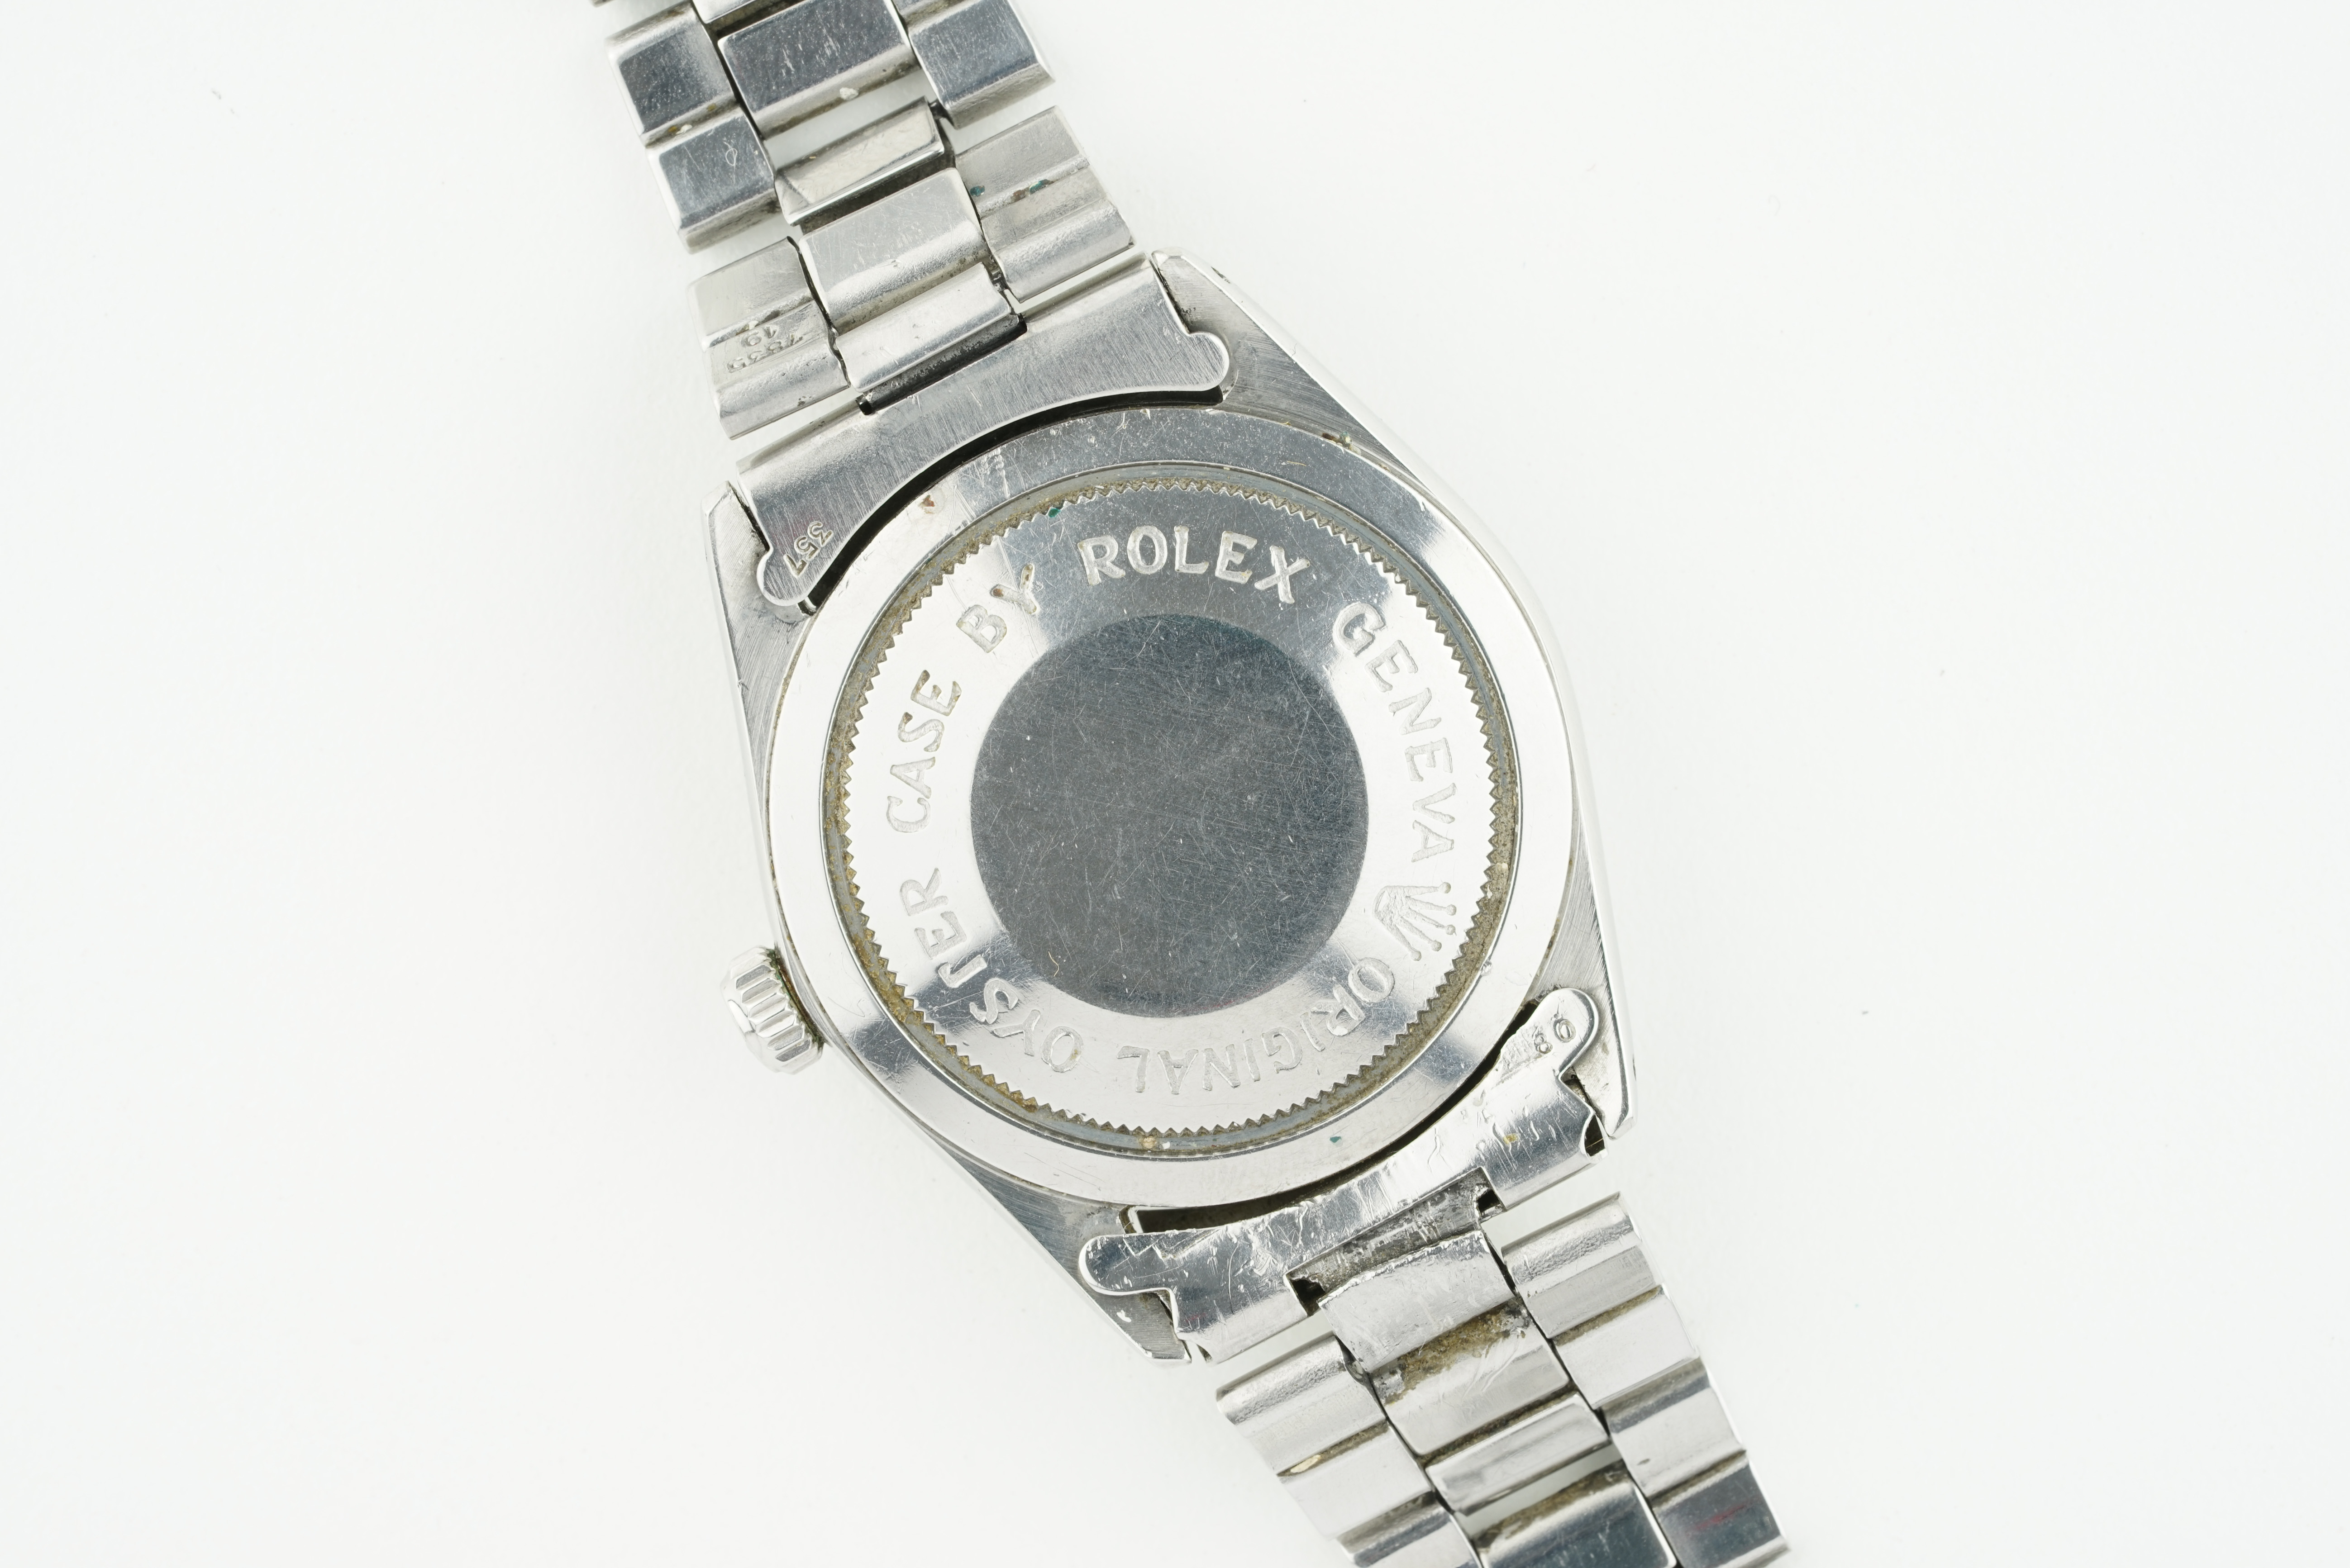 TUDOR OYSTER PRINCE WRISTWATCH REF. 799570 CIRCA 1970S, circular grey dial with applied hour markers - Image 2 of 2